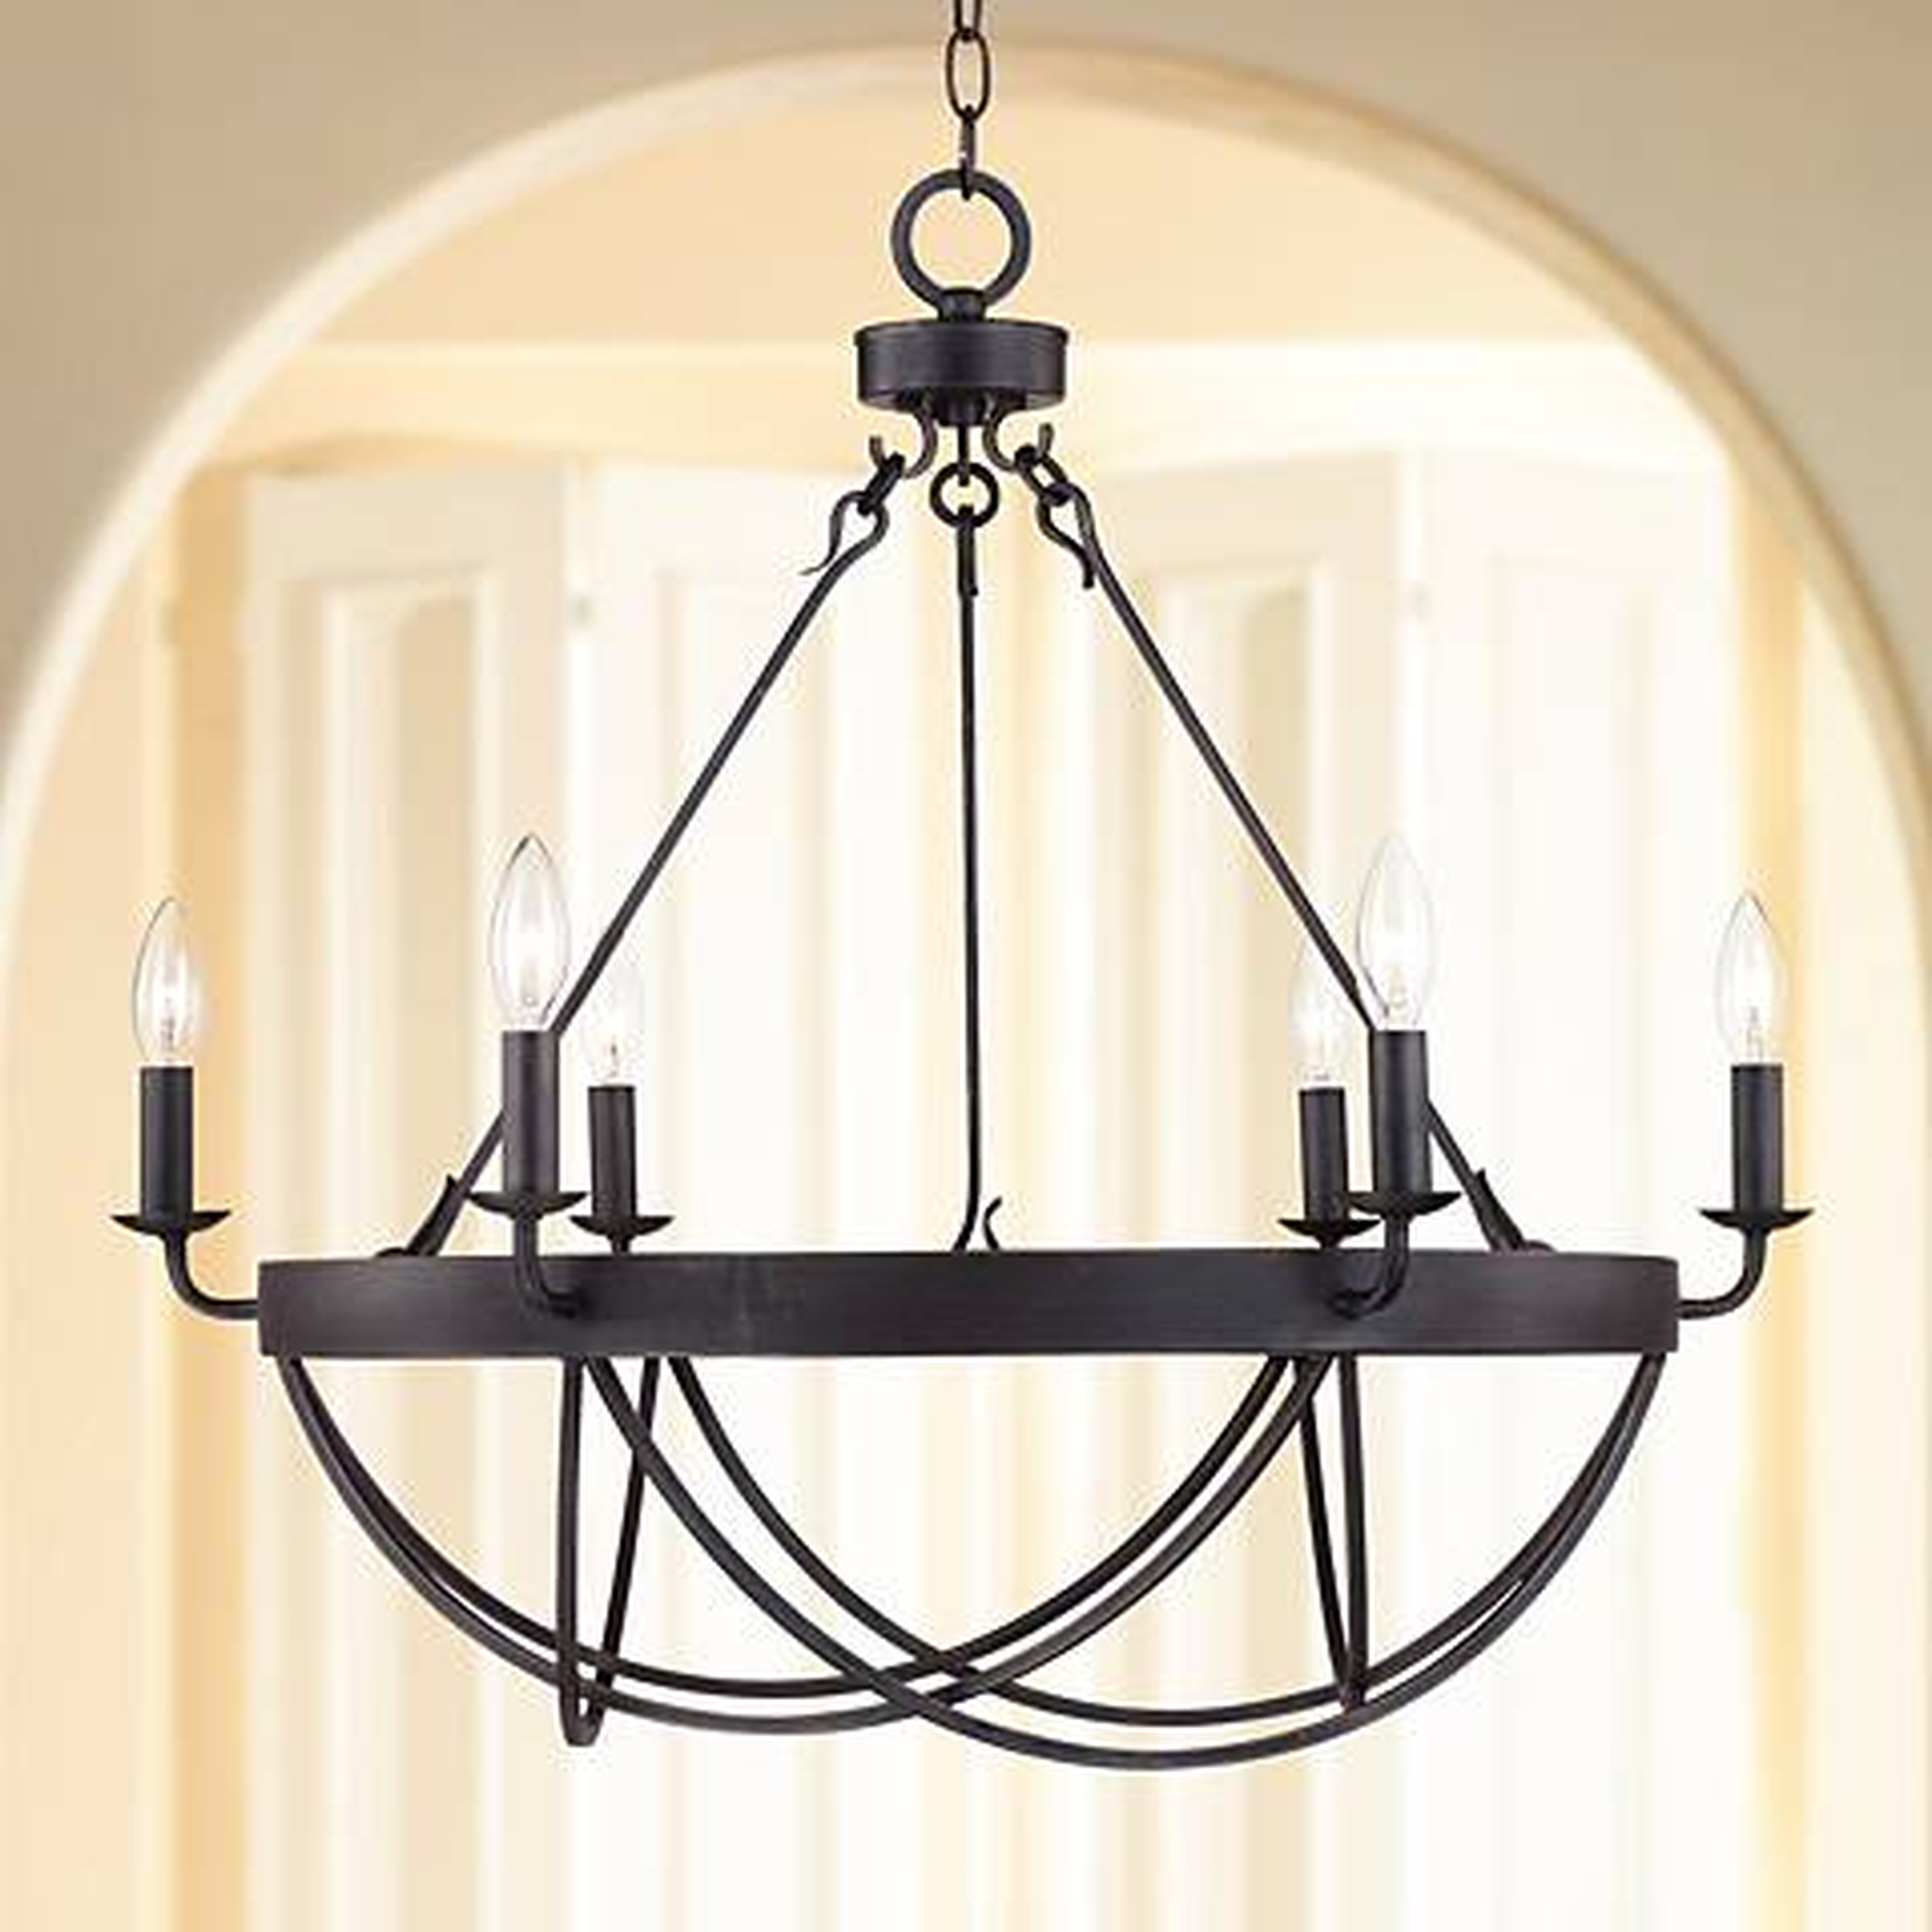 Lyster Square 28" Wide Oil-Rubbed Bronze Chandelier - Lamps Plus